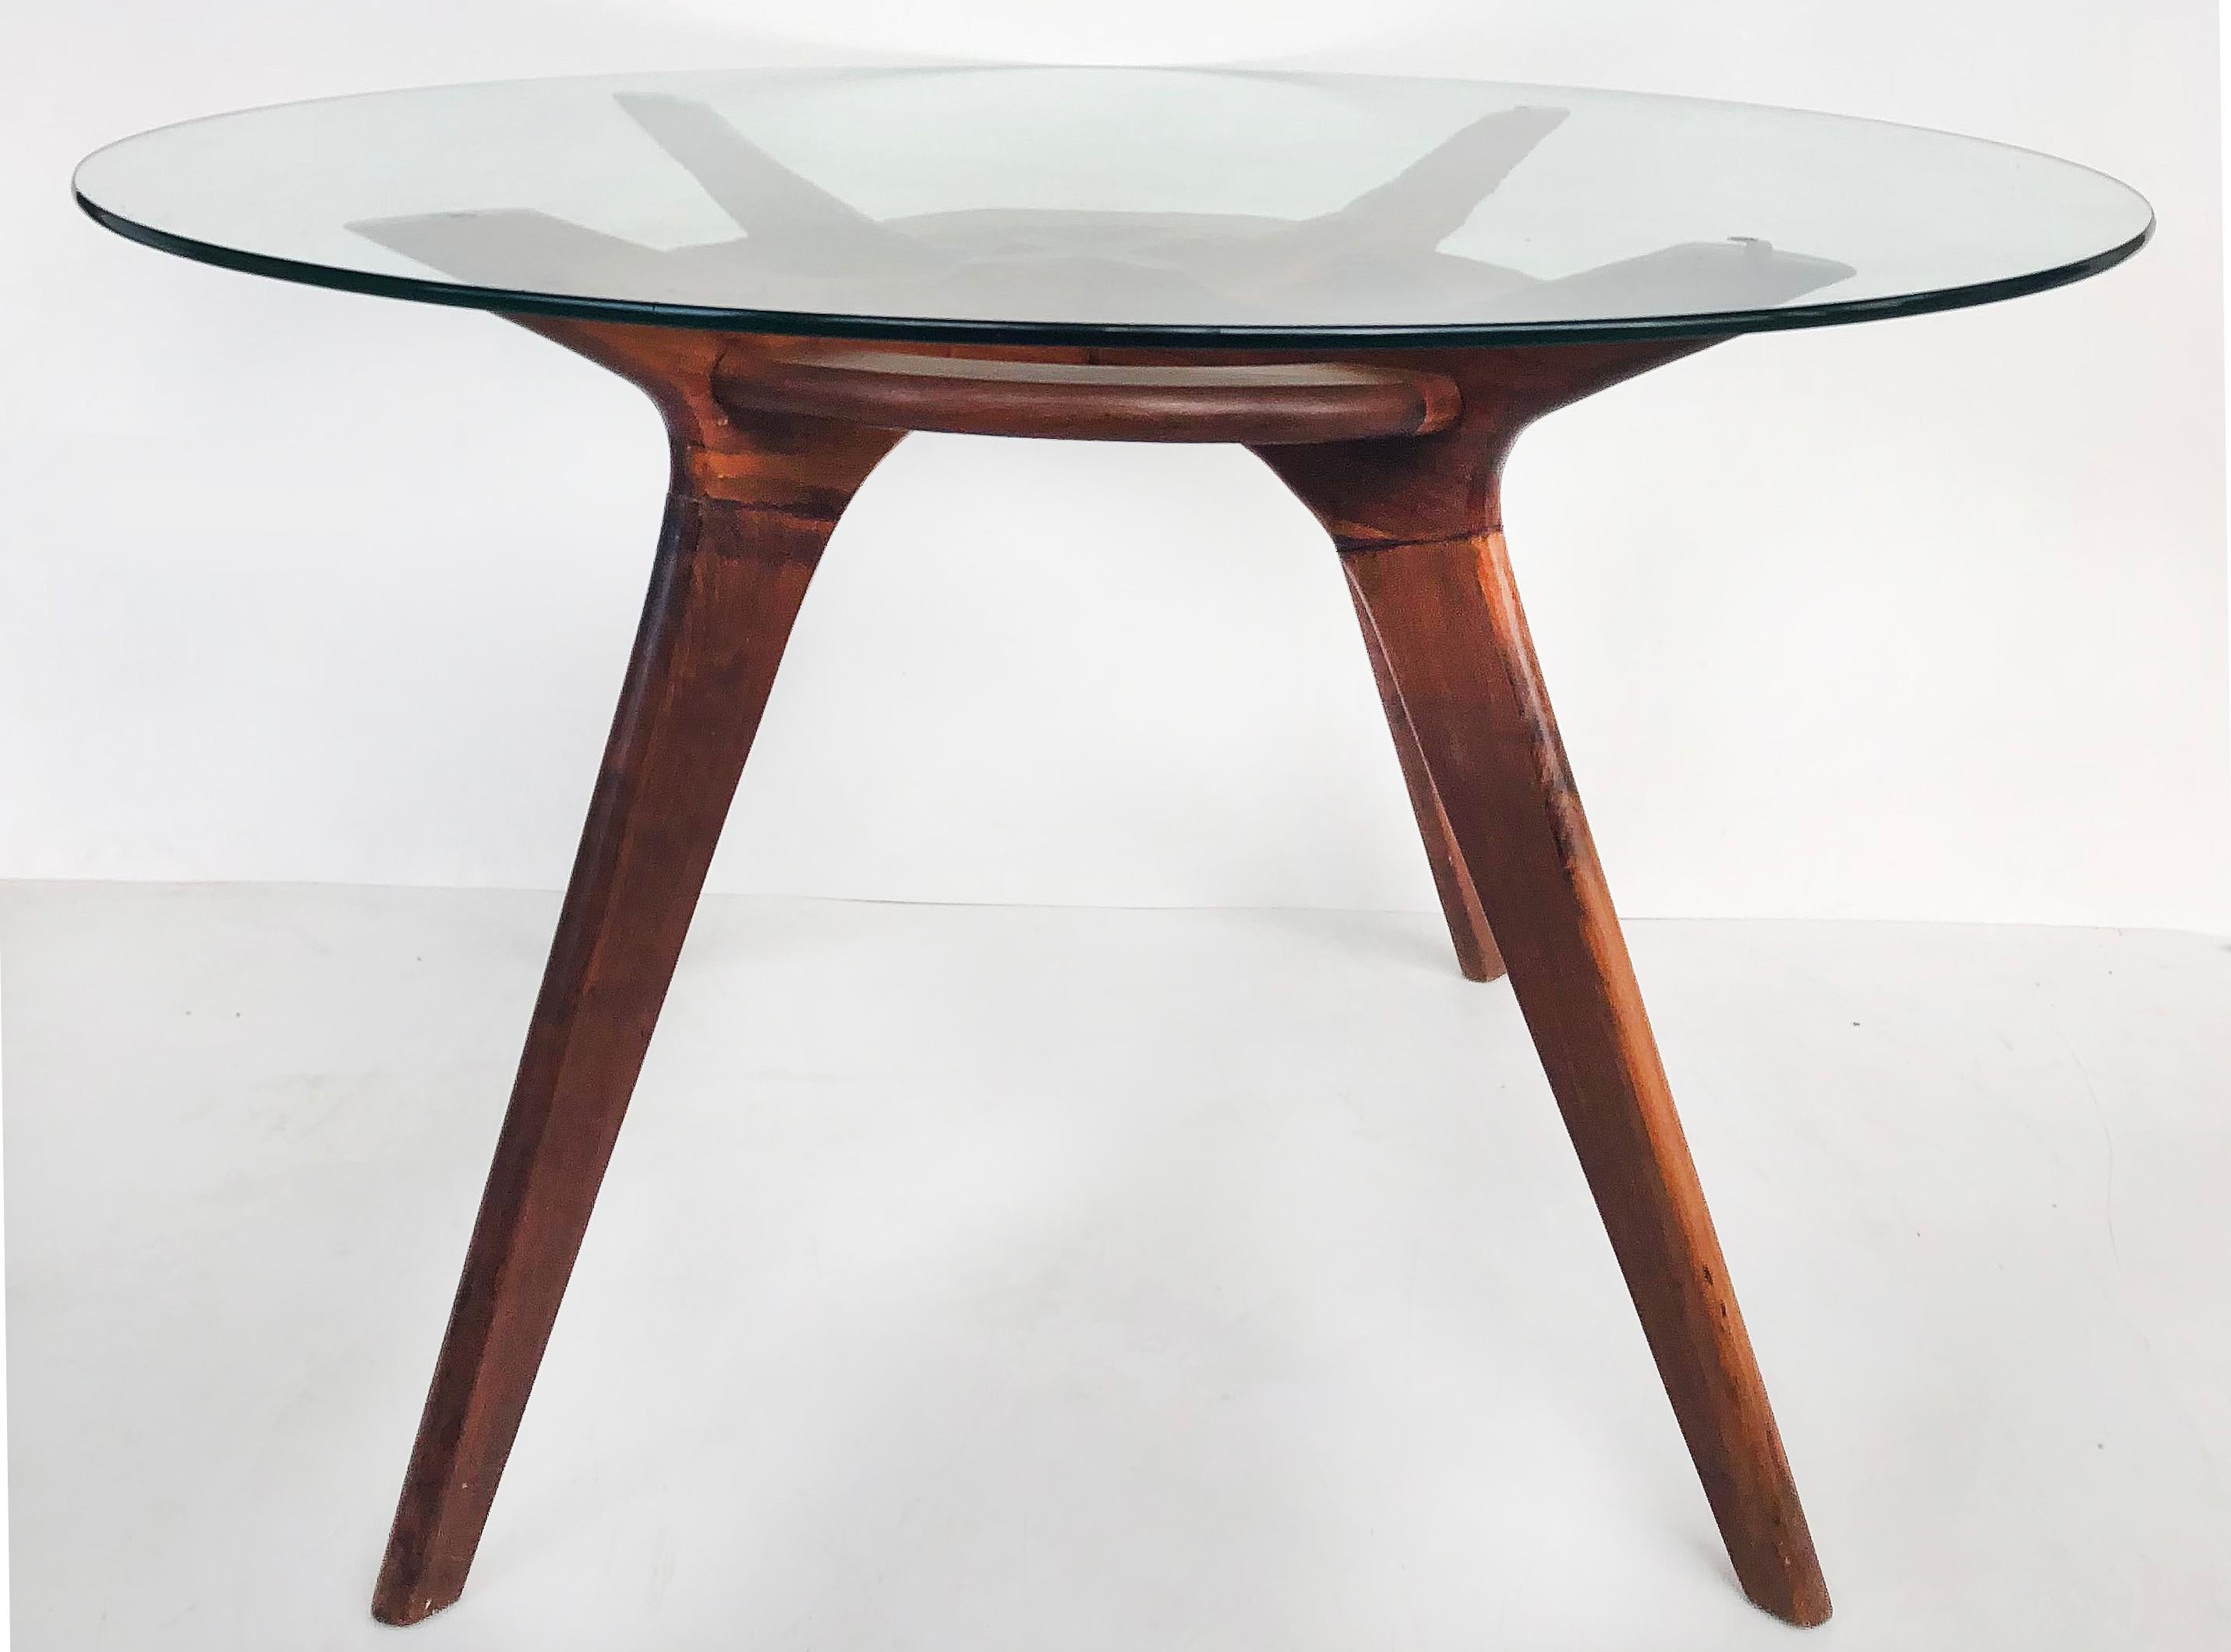 Offered for sale is an Adrian Pearsall glass top center/breakfast table with an oiled walnut base. The base supports a .5